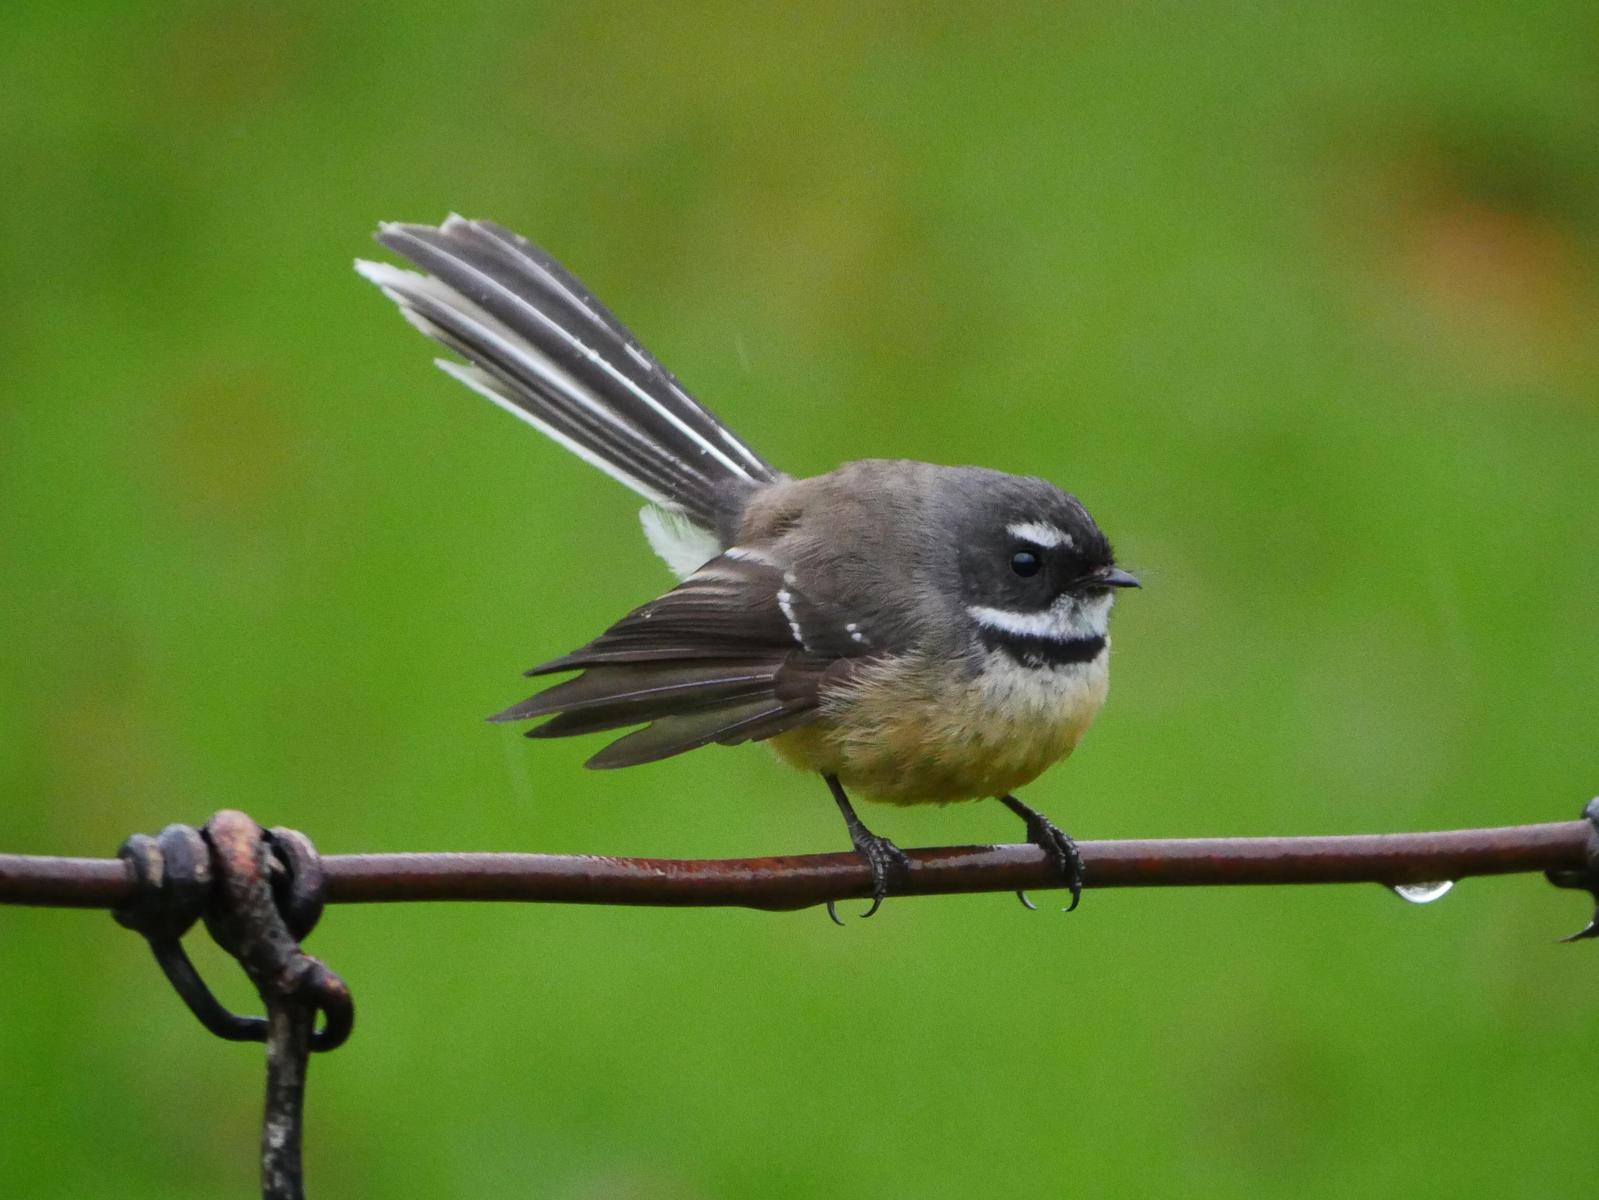 New Zealand Fantail Photo by Peter Lowe